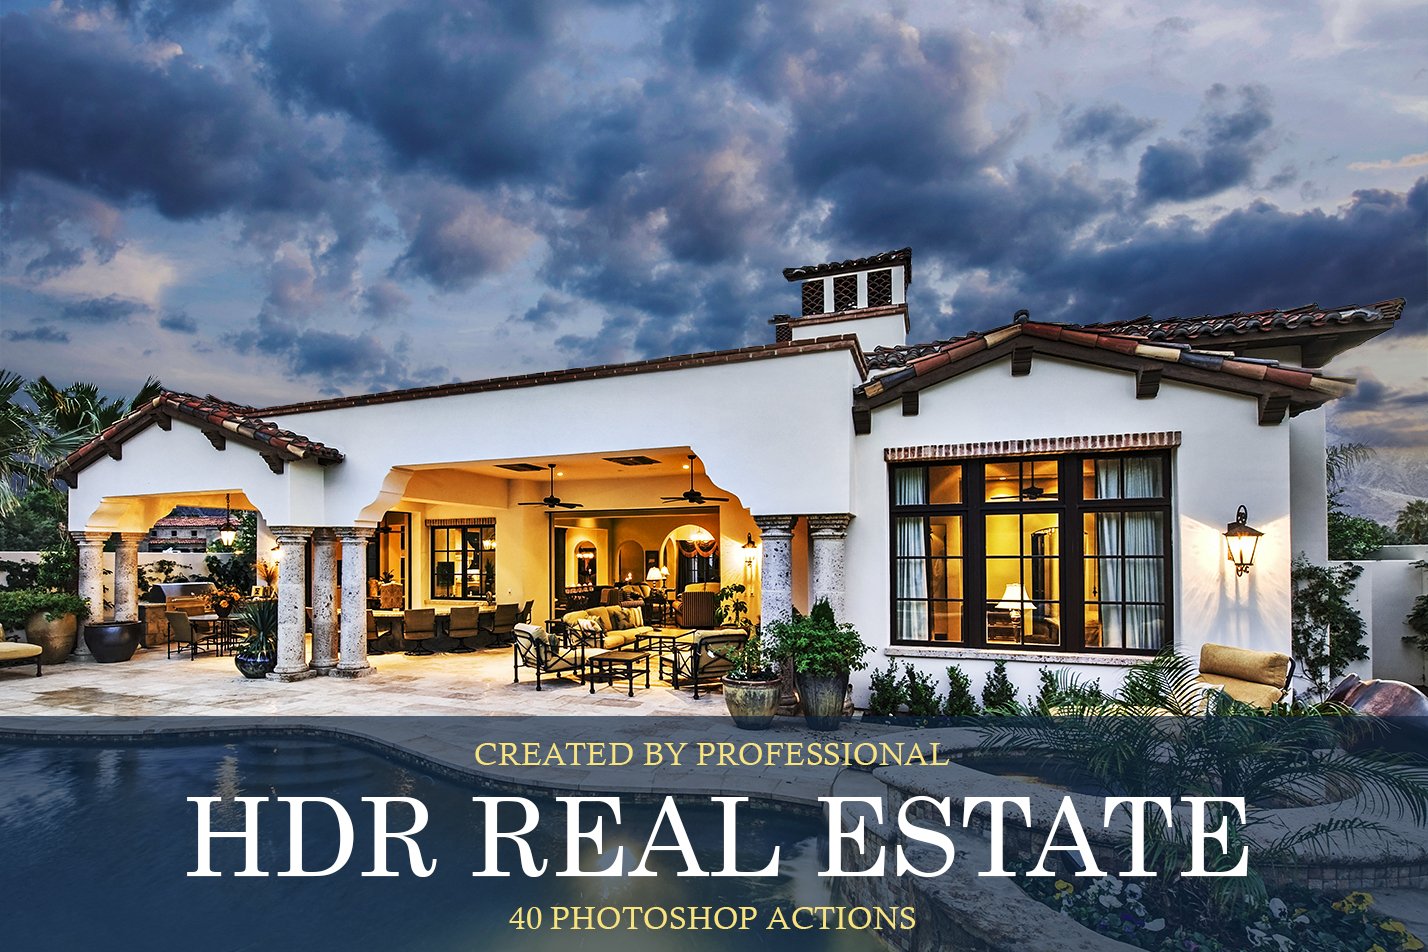 HDR Real Estate Photoshop Actionscover image.